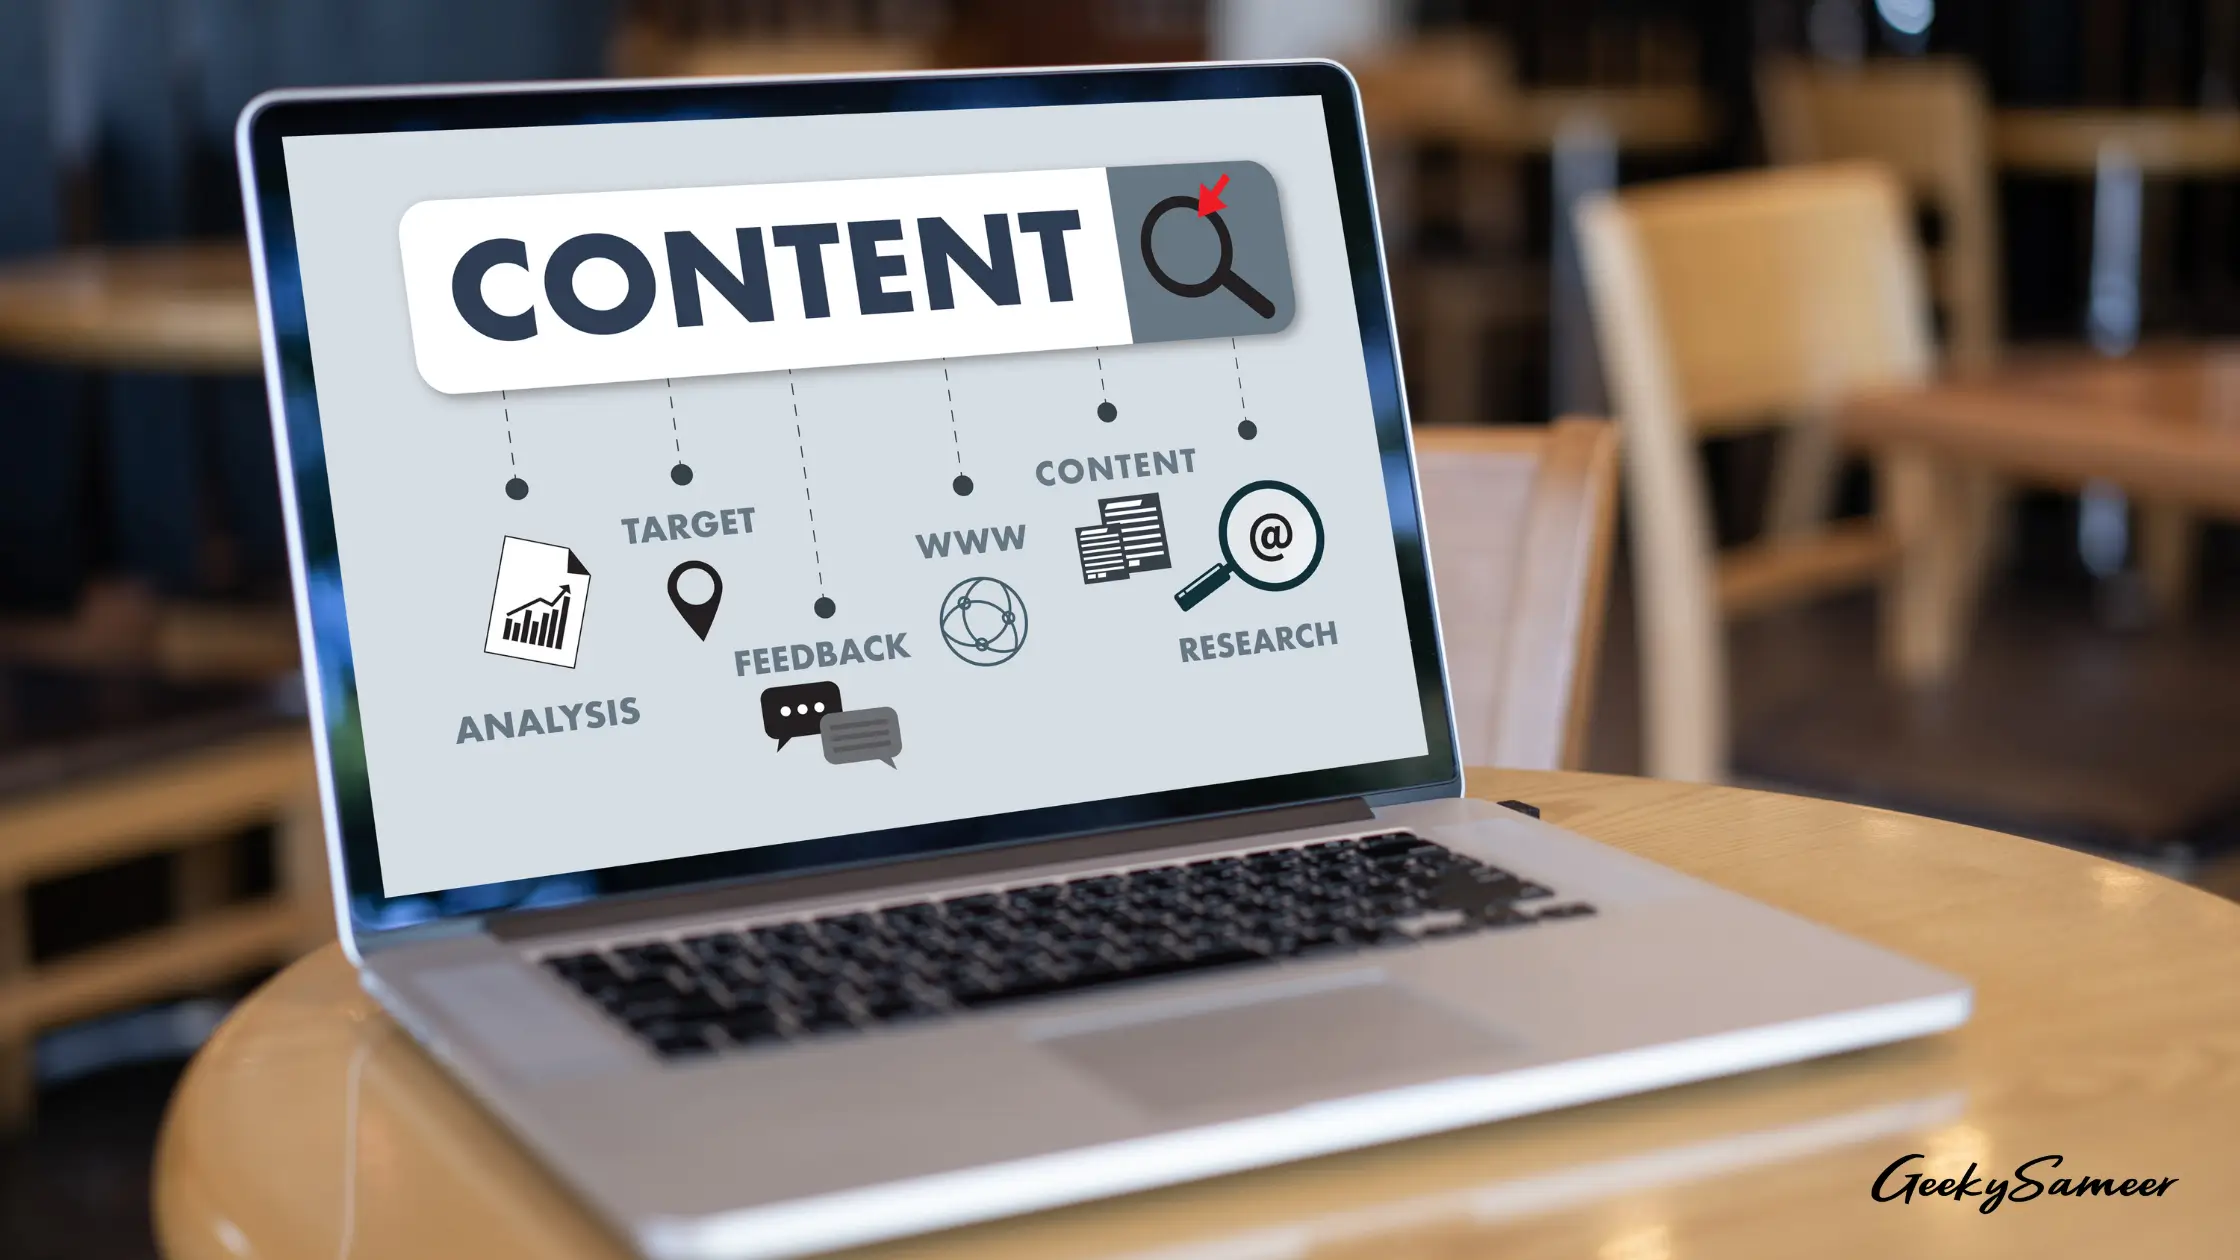 Creating Compelling Content